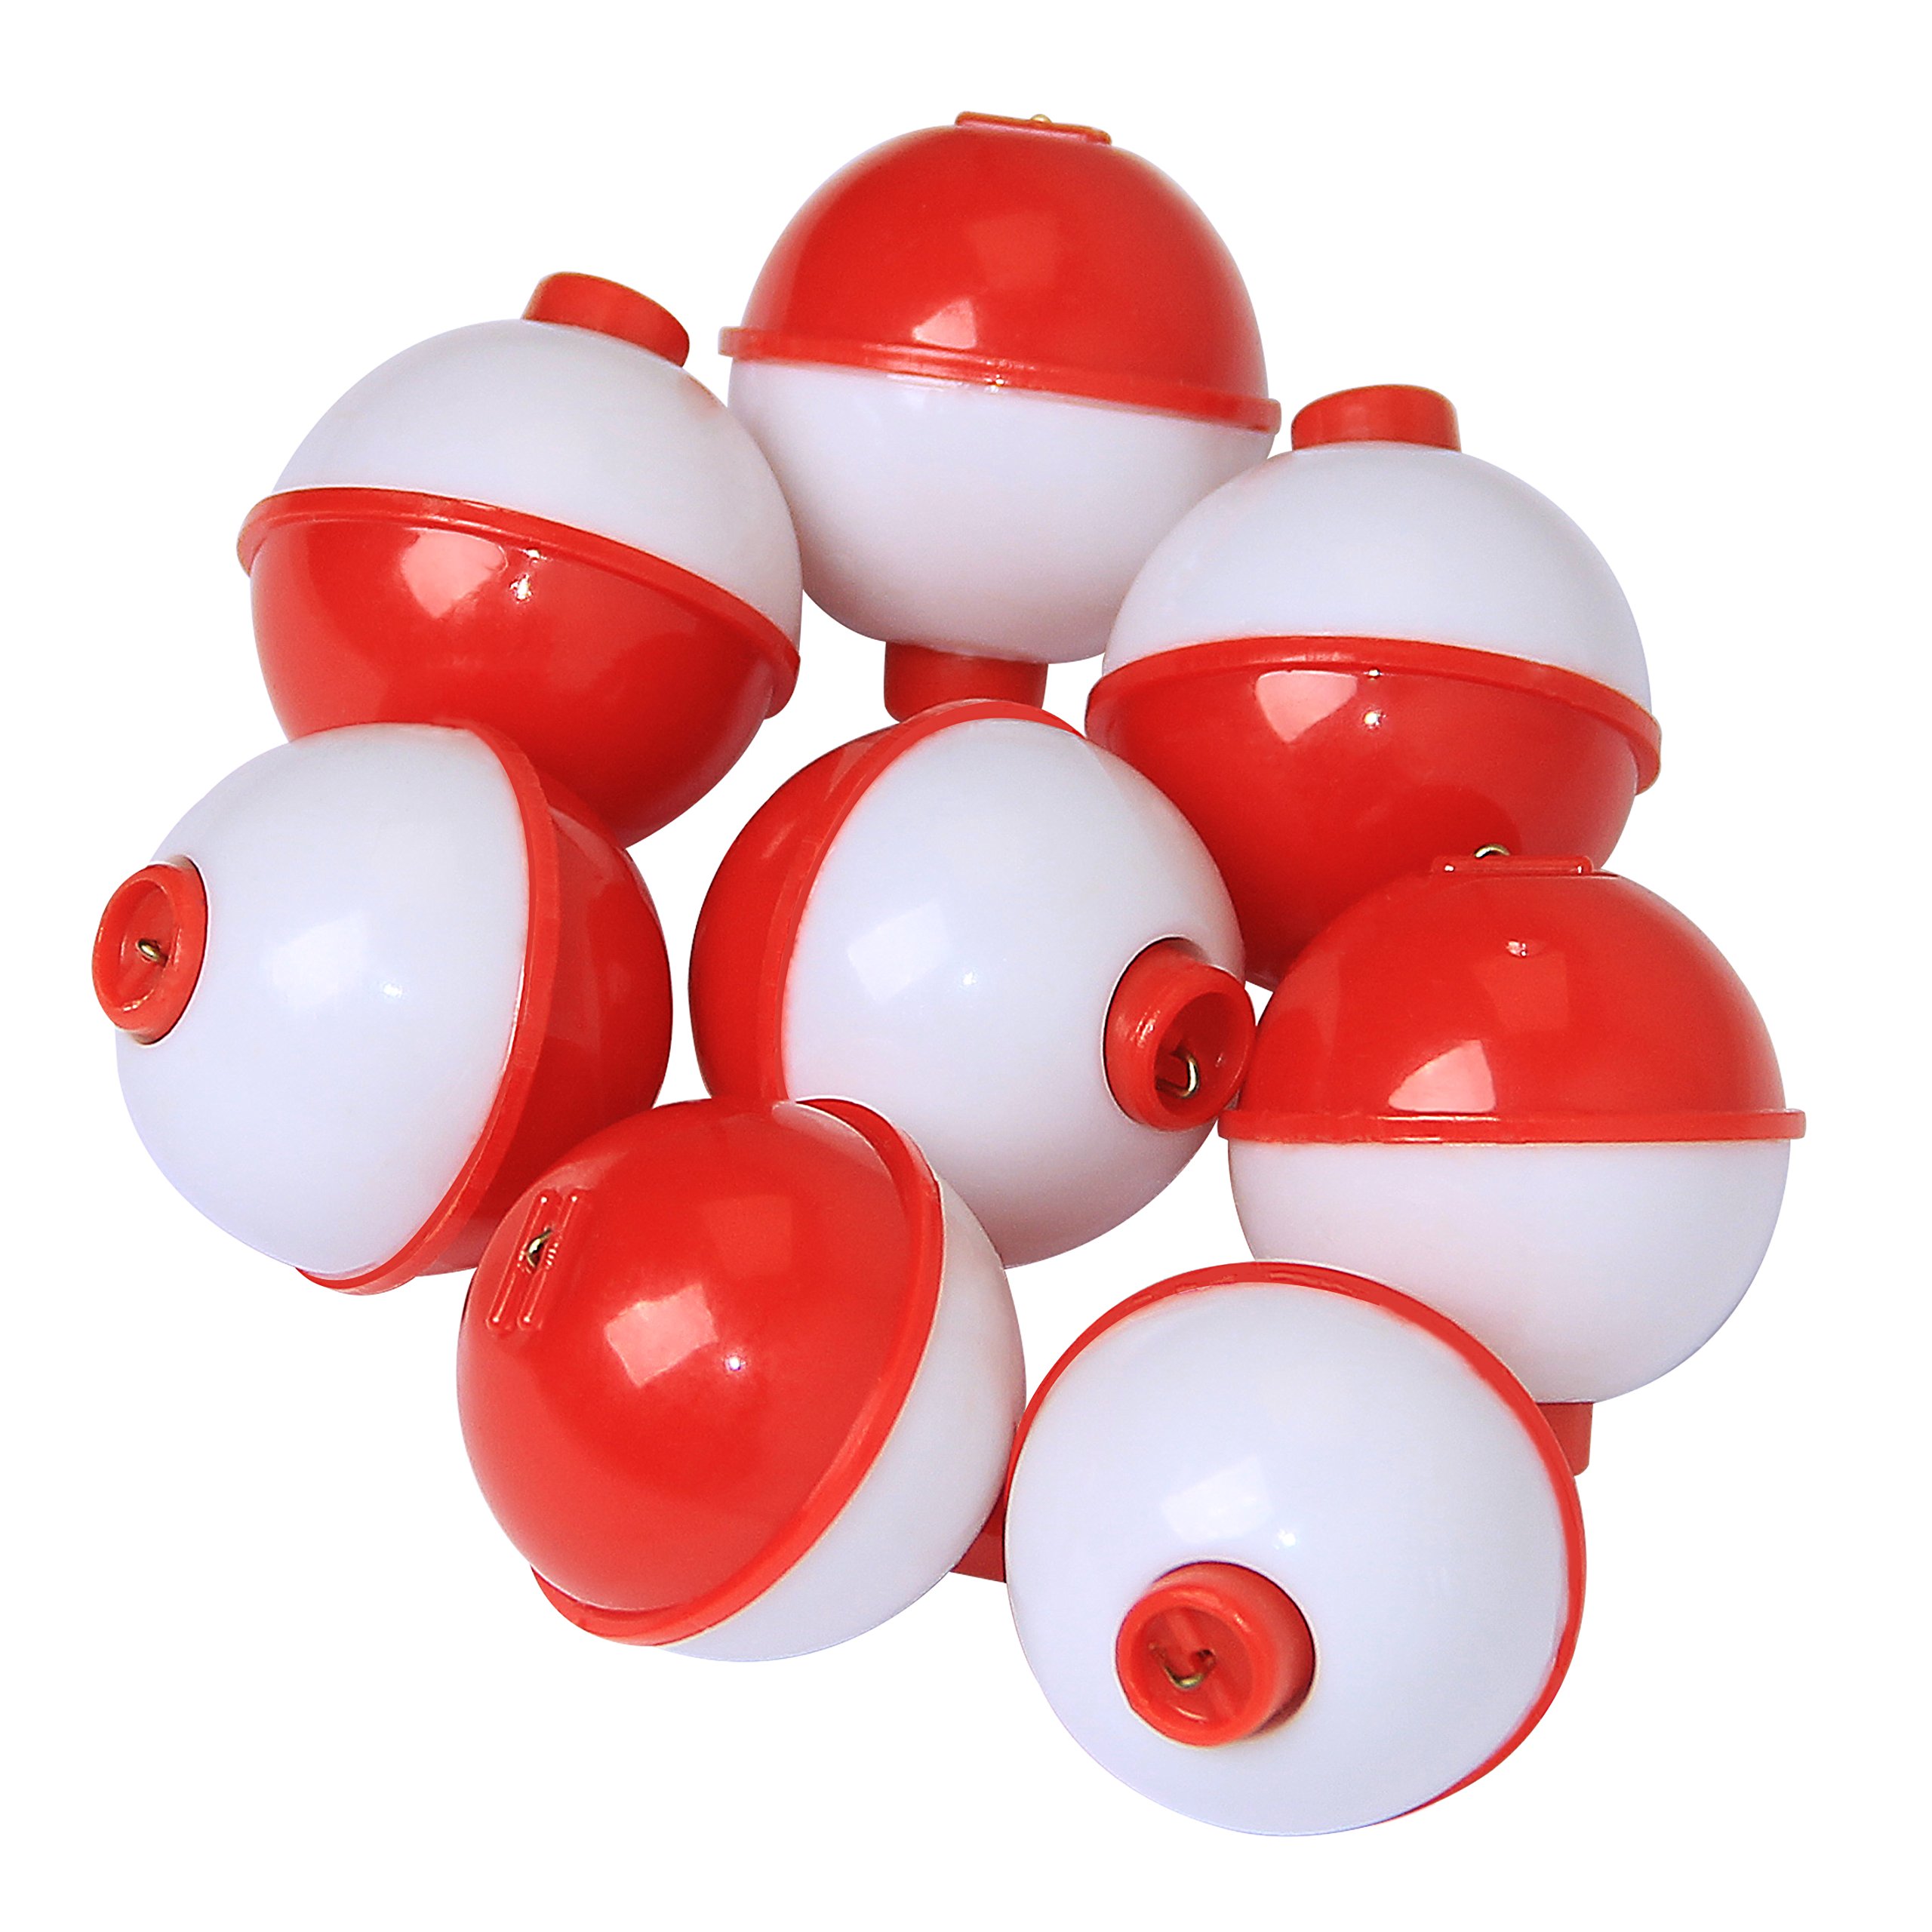 Fishing Bobbers Set Snap Hard ABS on Red/White Fishing Floats